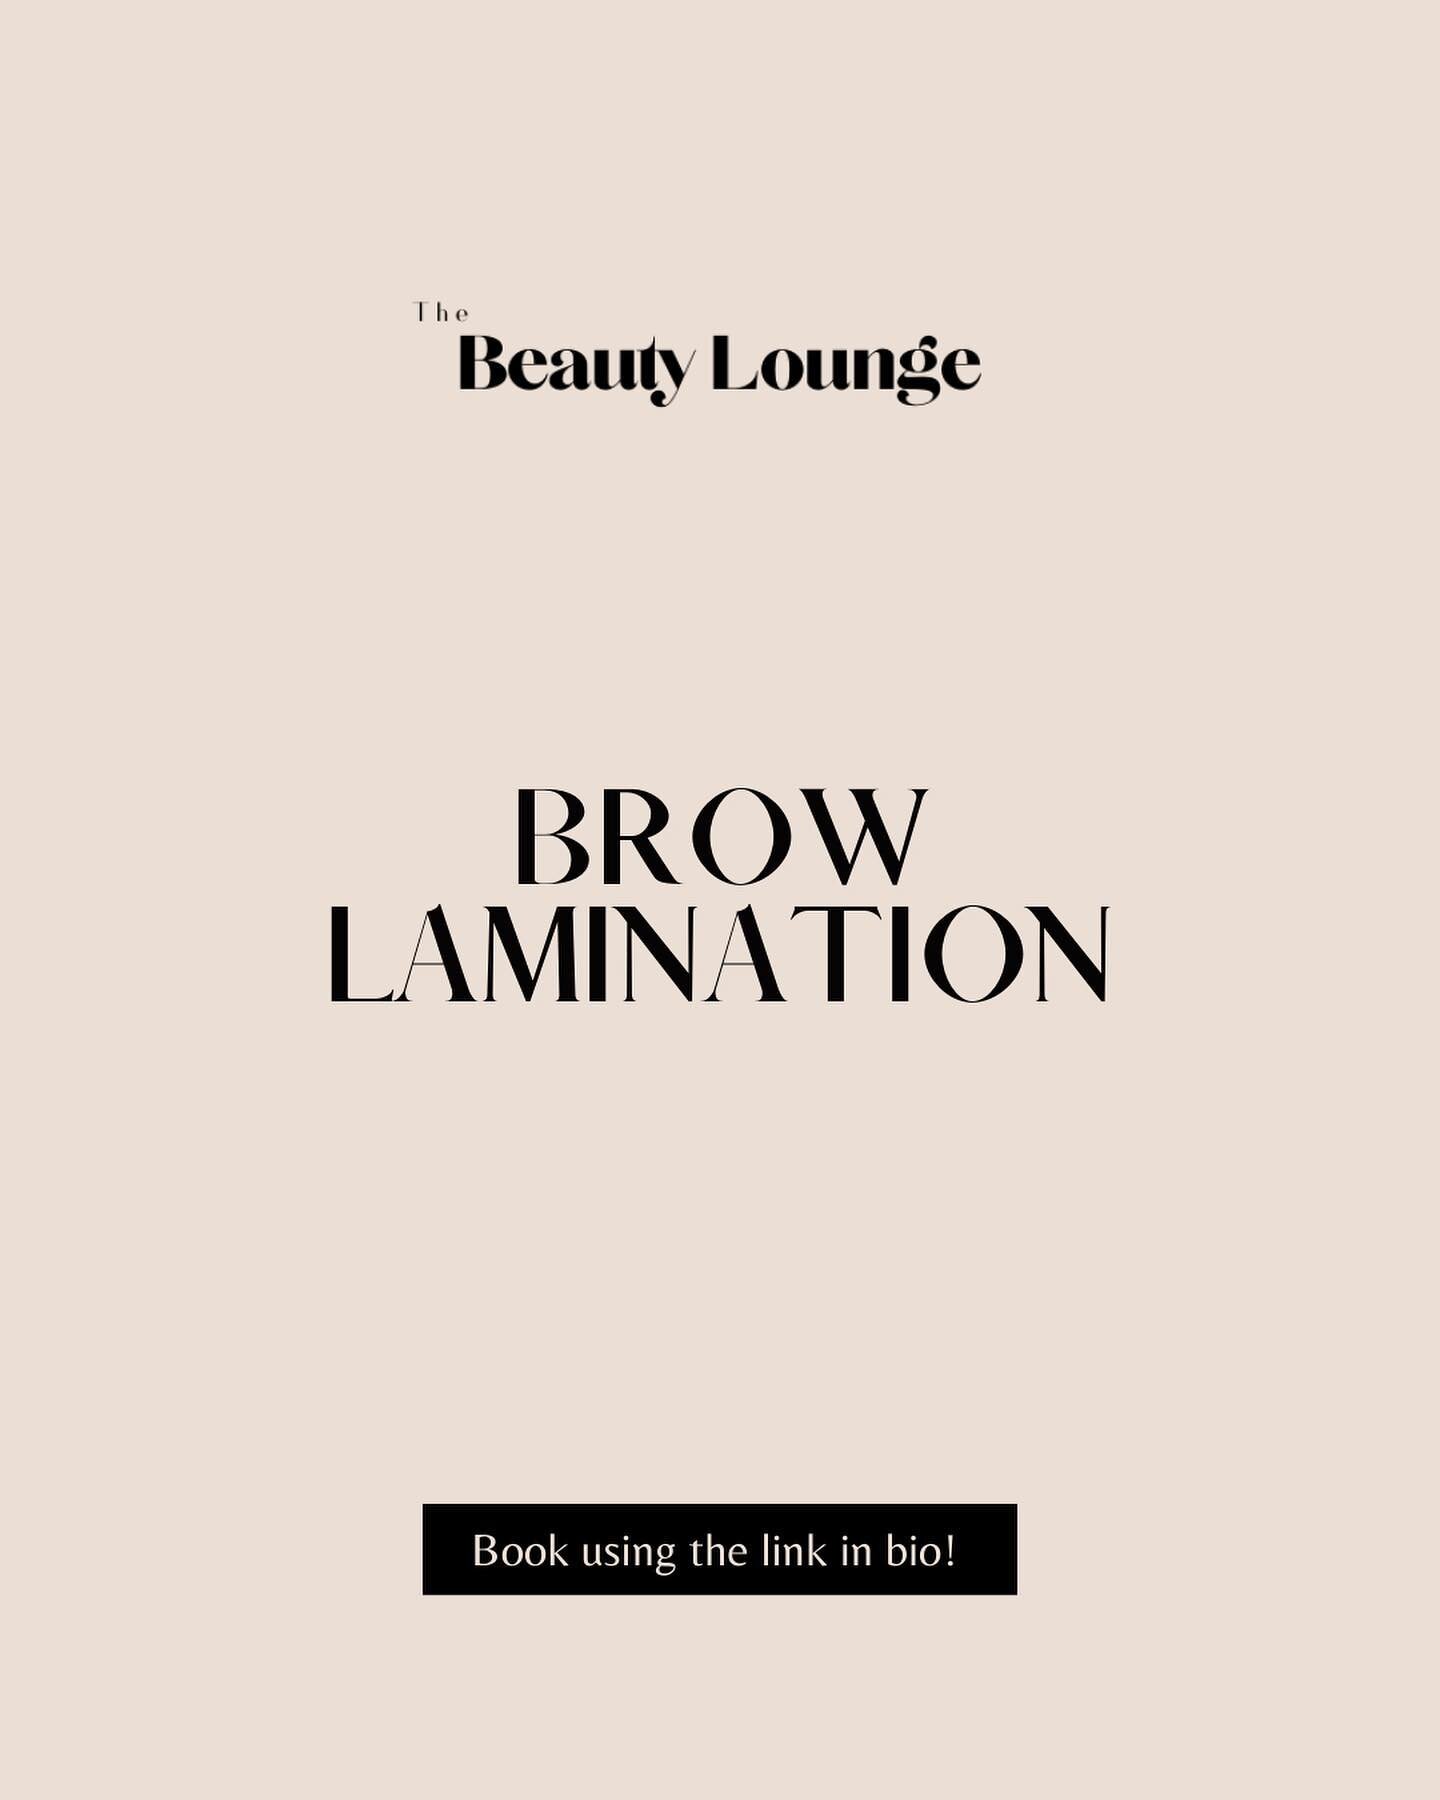 Say goodbye to bad brow days with our brow lamination treatment! ✨

Get fuller, defined and perfectly shaped brows that will make you feel confident and beautiful. 🫶🏻

Book your appointment now using the link in our bio 📲